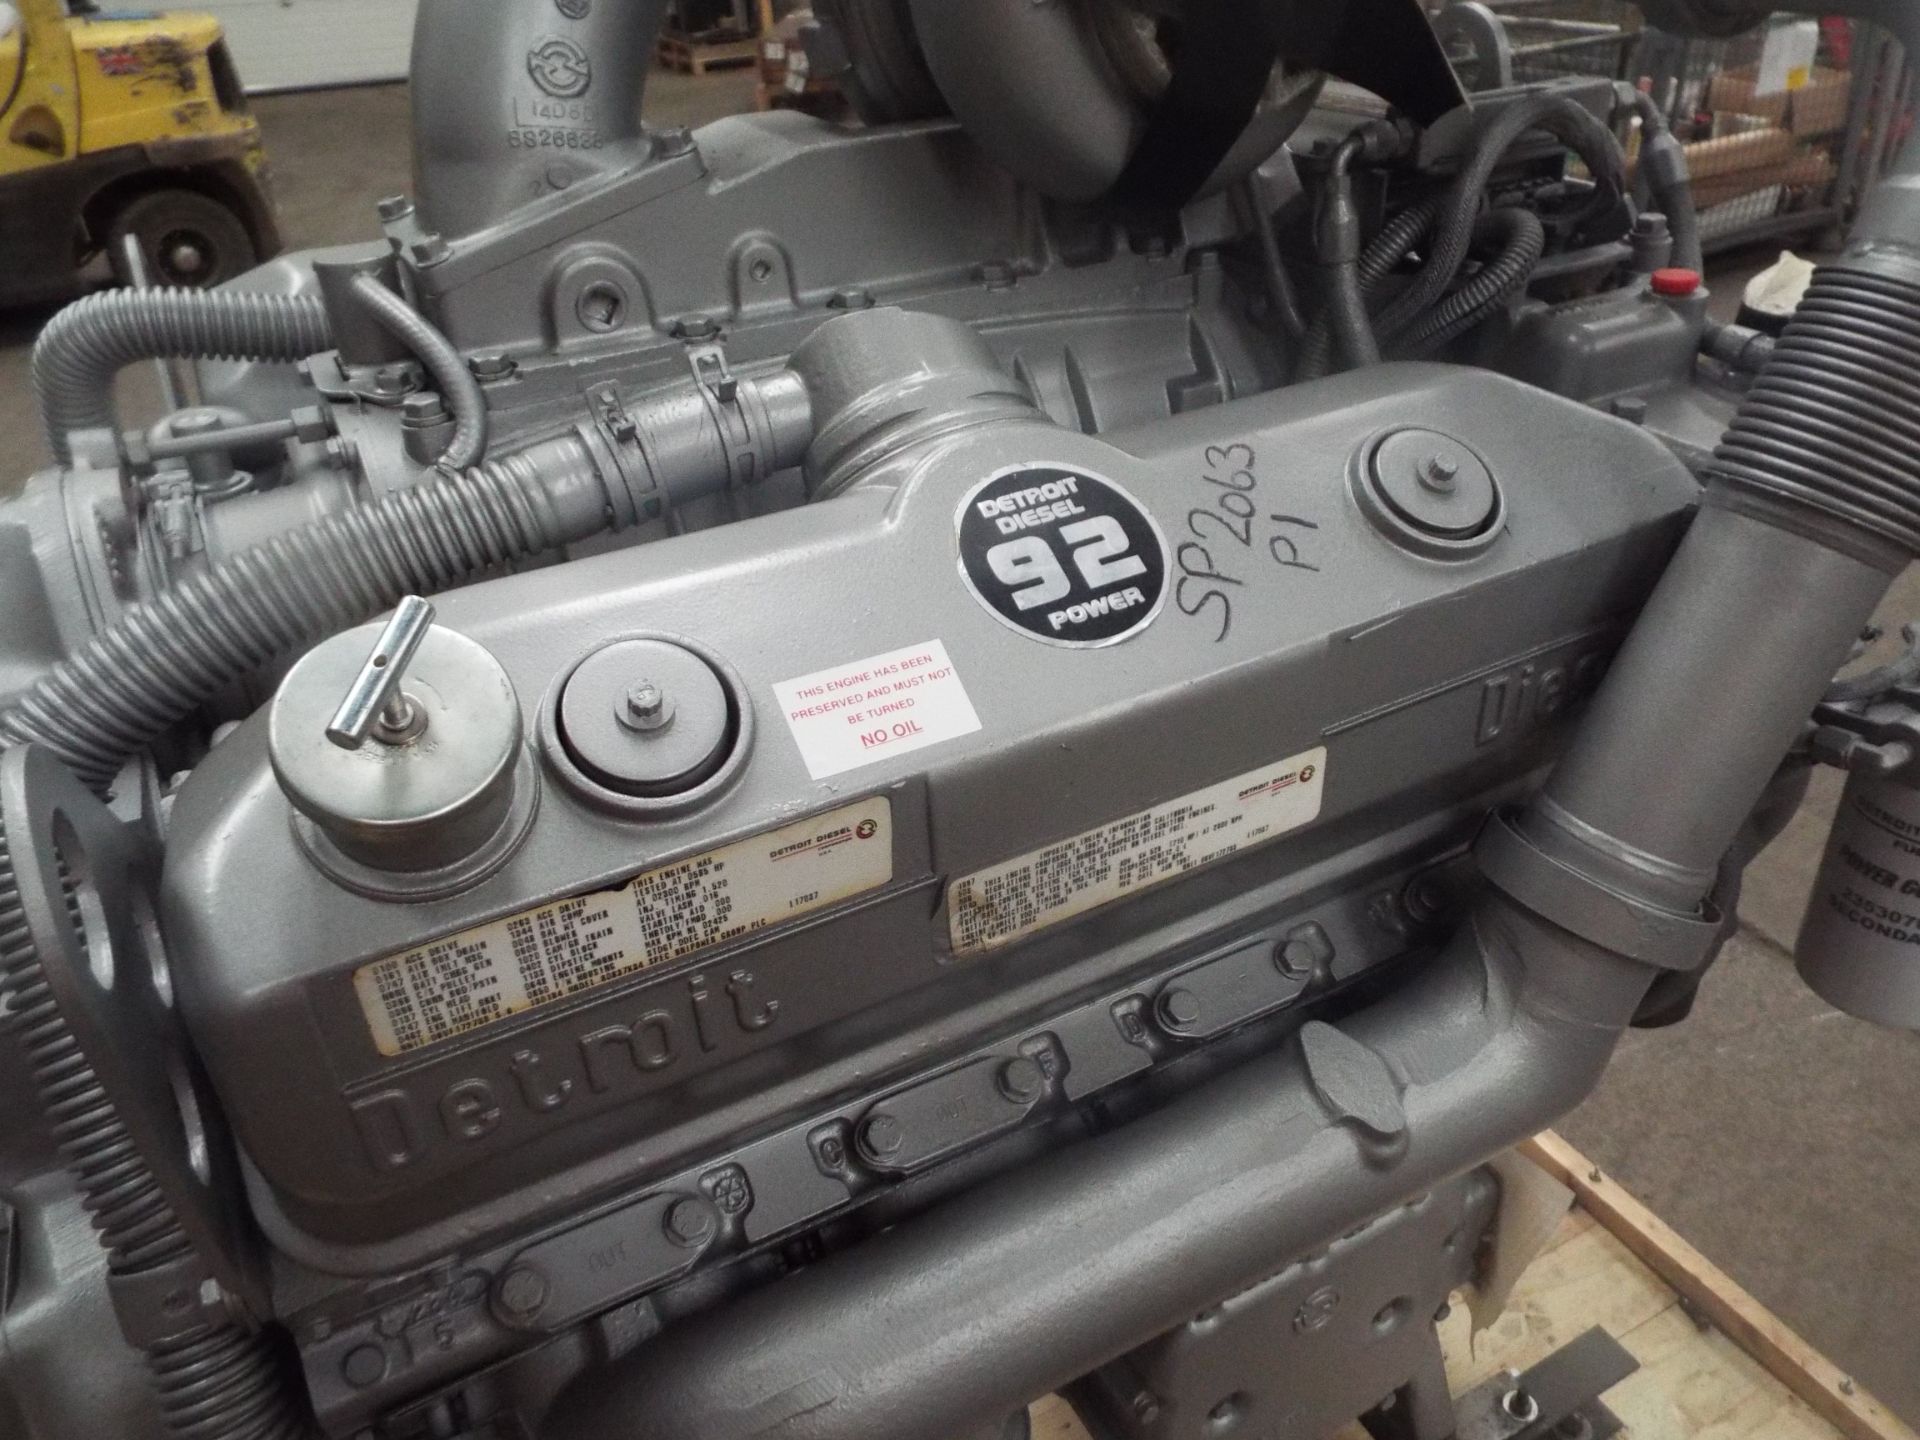 Detroit 8V-92TA DDEC V8 Turbo Diesel Engine Complete with Ancillaries and Starter Motor - Image 13 of 20